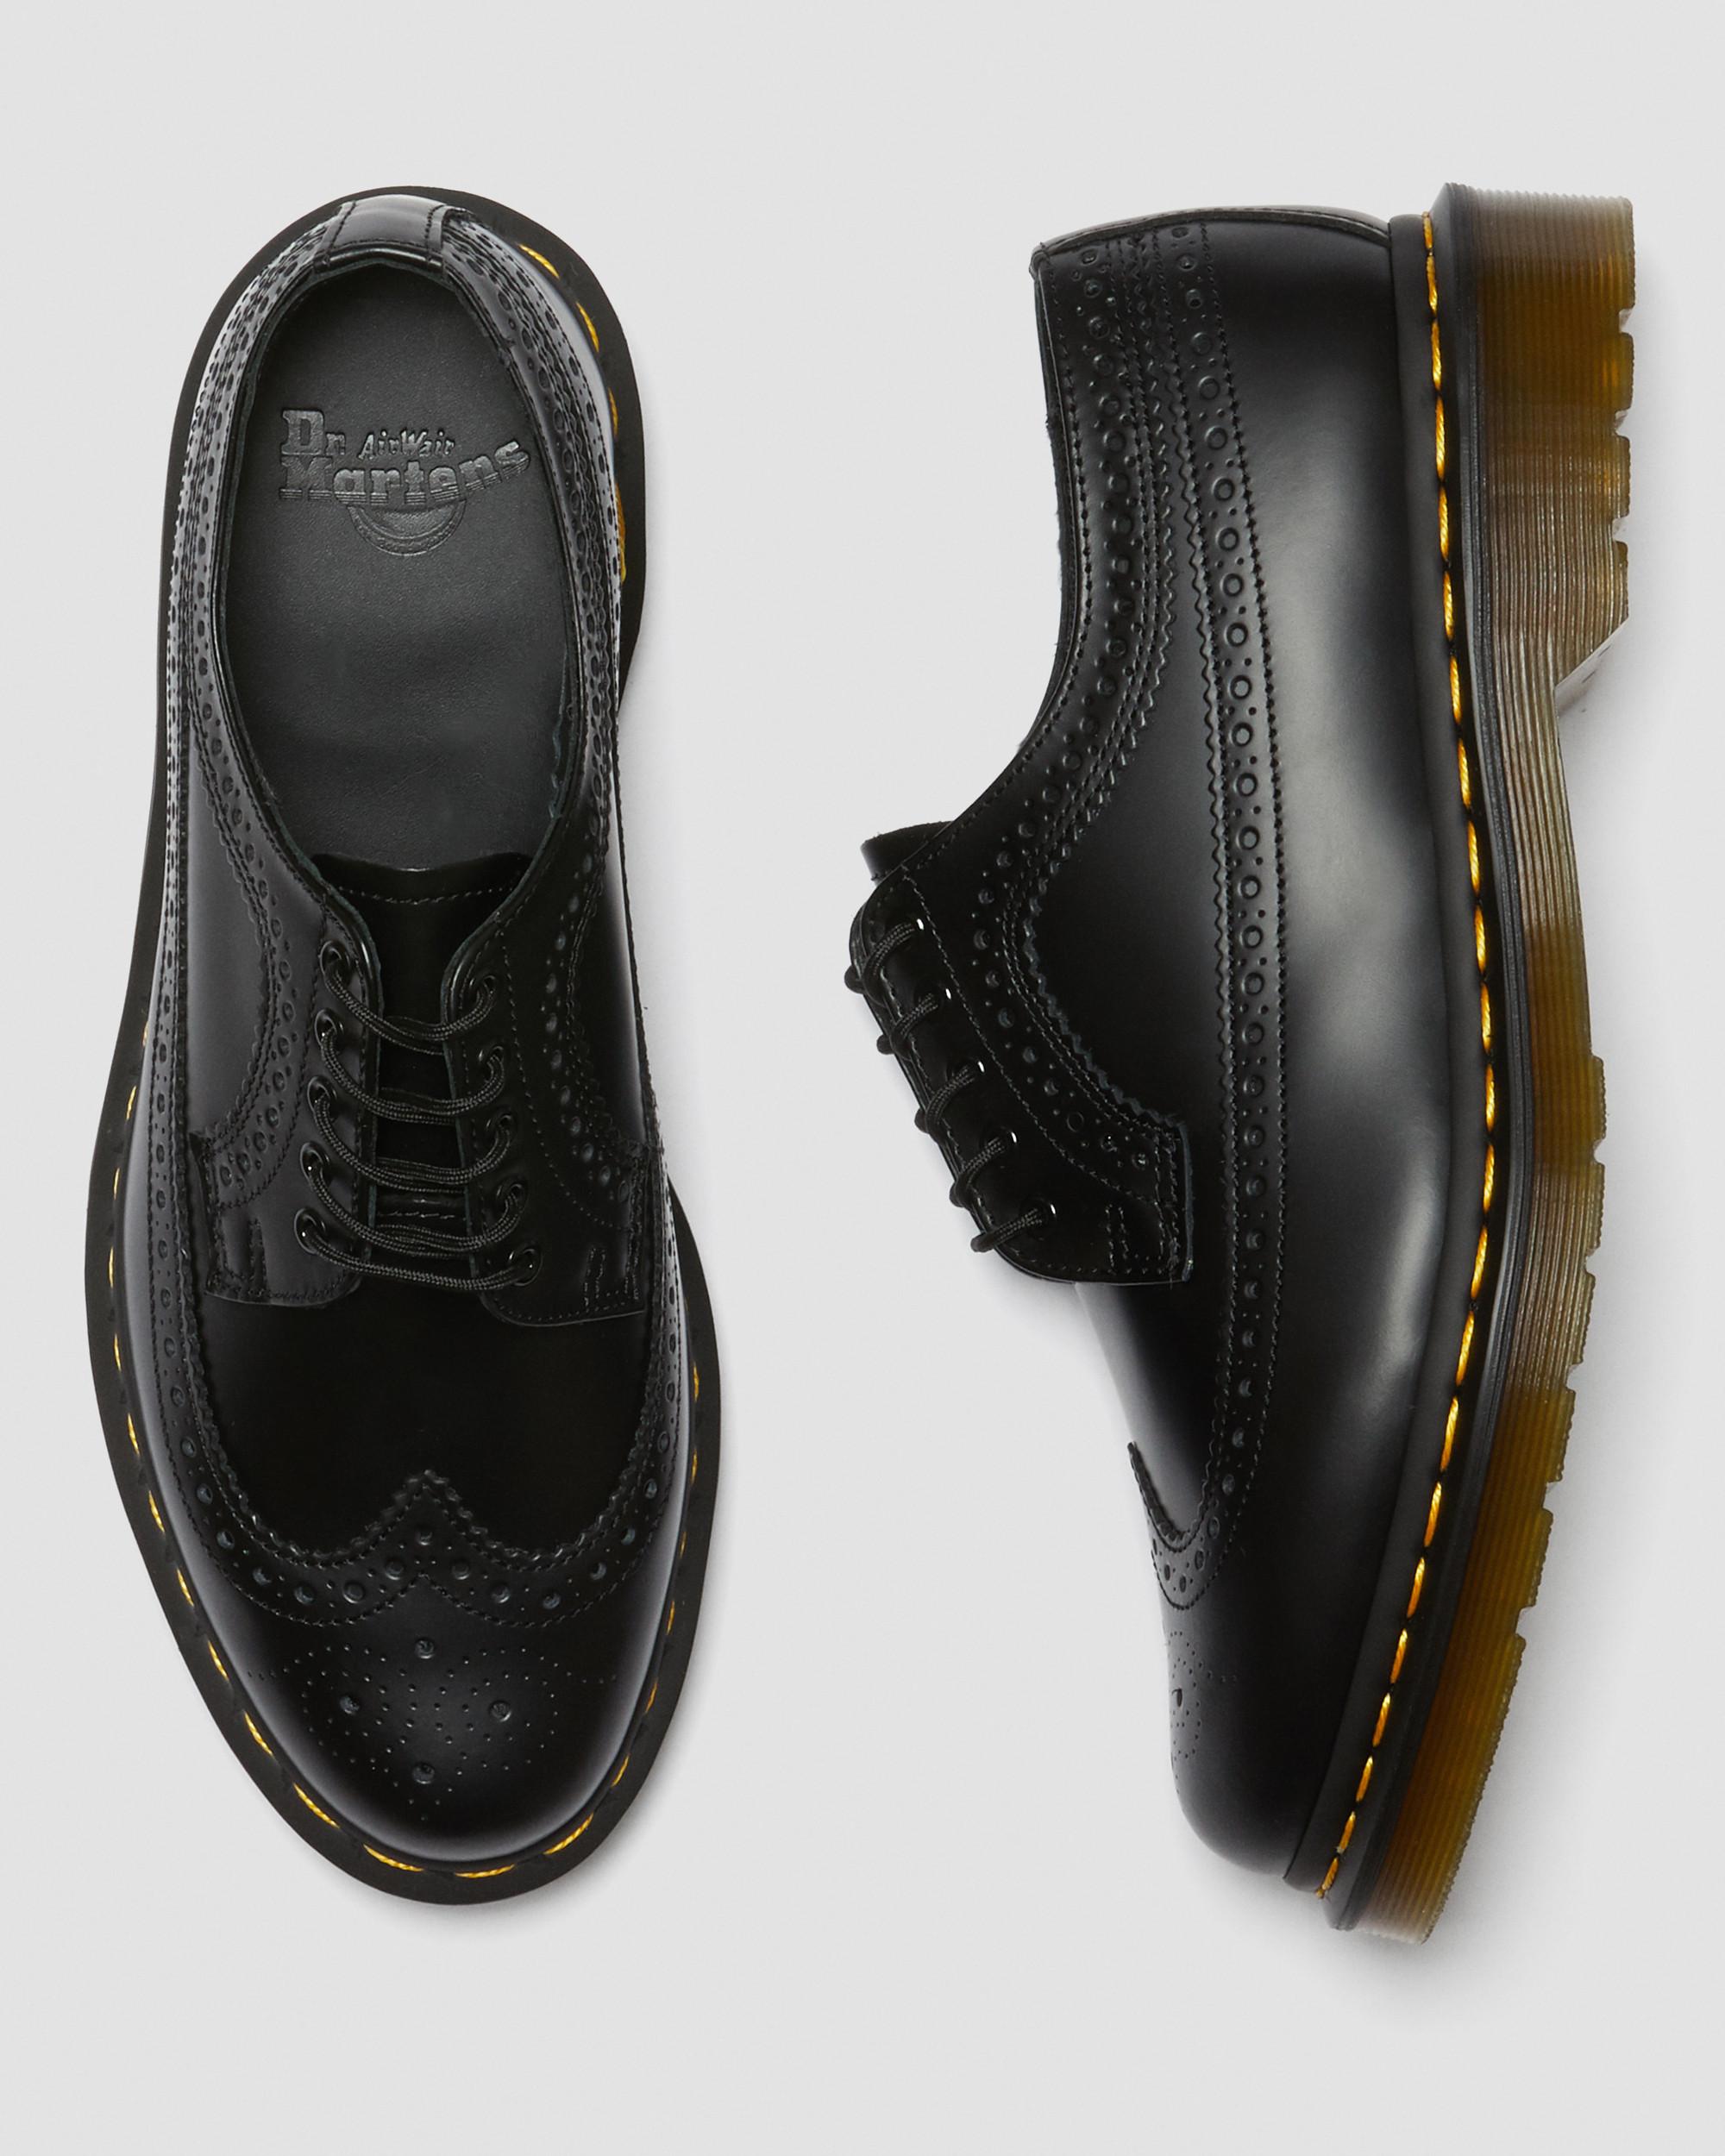 3989 Smooth Leather Brogue Shoes3989 Smooth Leather Brogue -kengät Dr. Martens